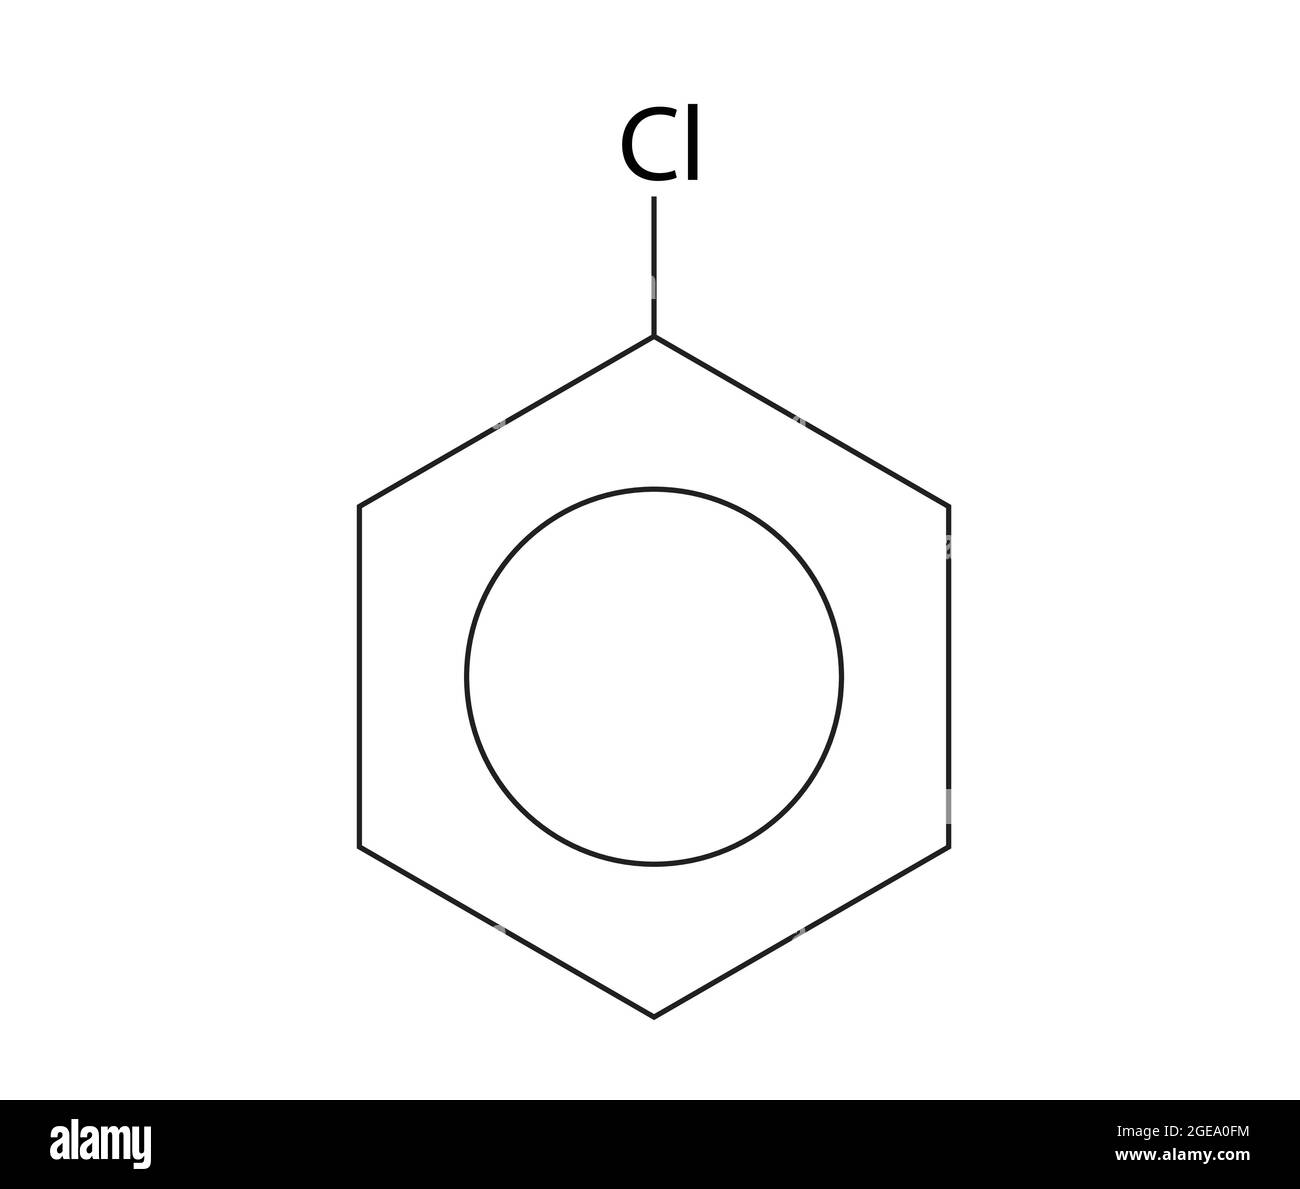 Chemical Structure of Chlorobenzene, Anatomy Of Chlorobenzene, Molecular structure of   , Chemical formula of Chlorobenzene, Chlorobenzene structure Stock Vector